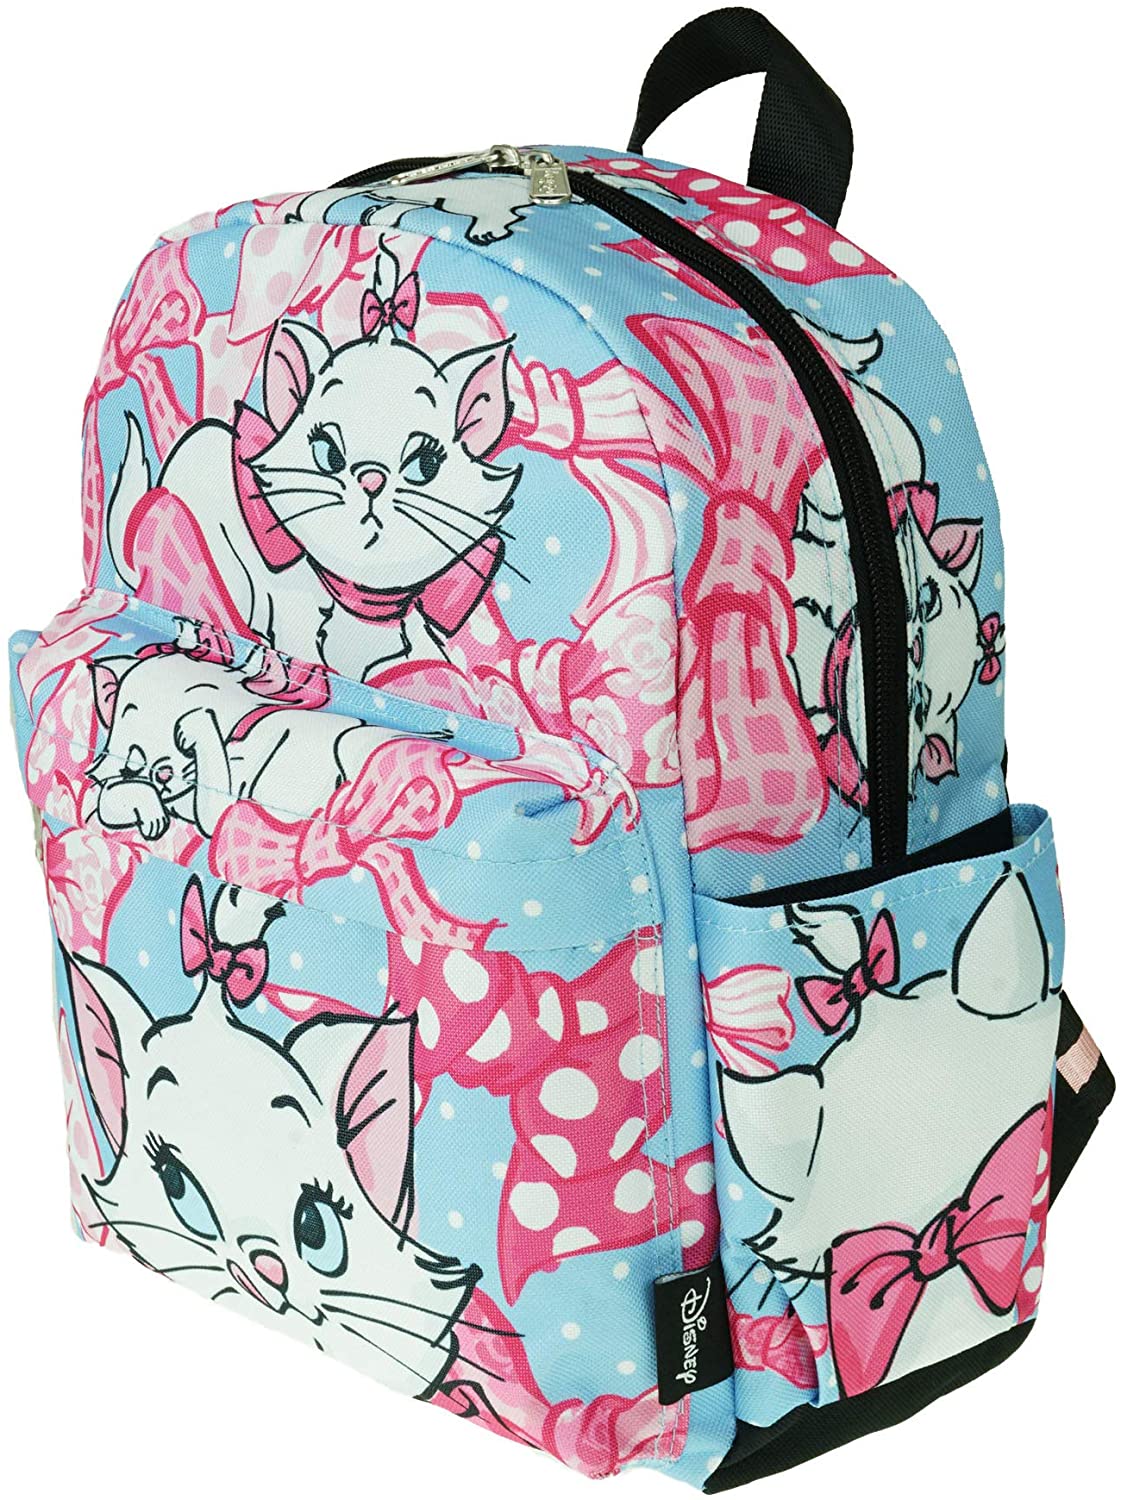 Aristocats - Marie 12" Deluxe Oversize Print Daypack - A21327 - GTE Zone